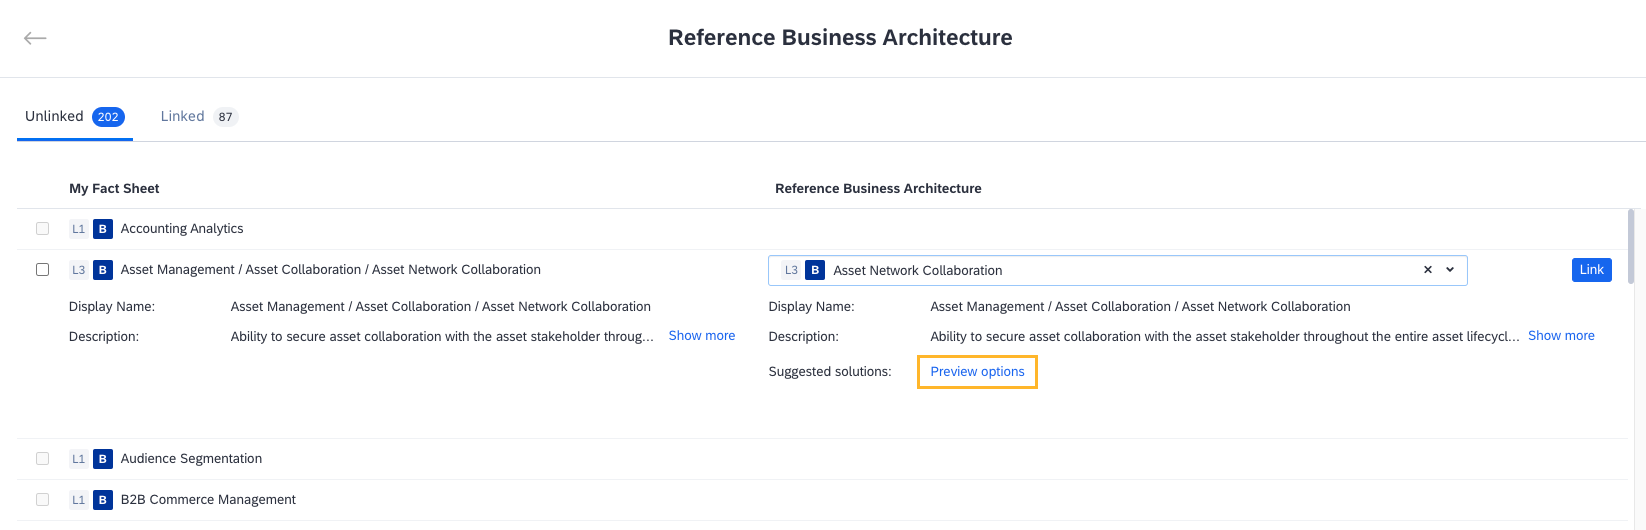 Previewing Suggested SAP Solutions from the Reference Business Architecture Page